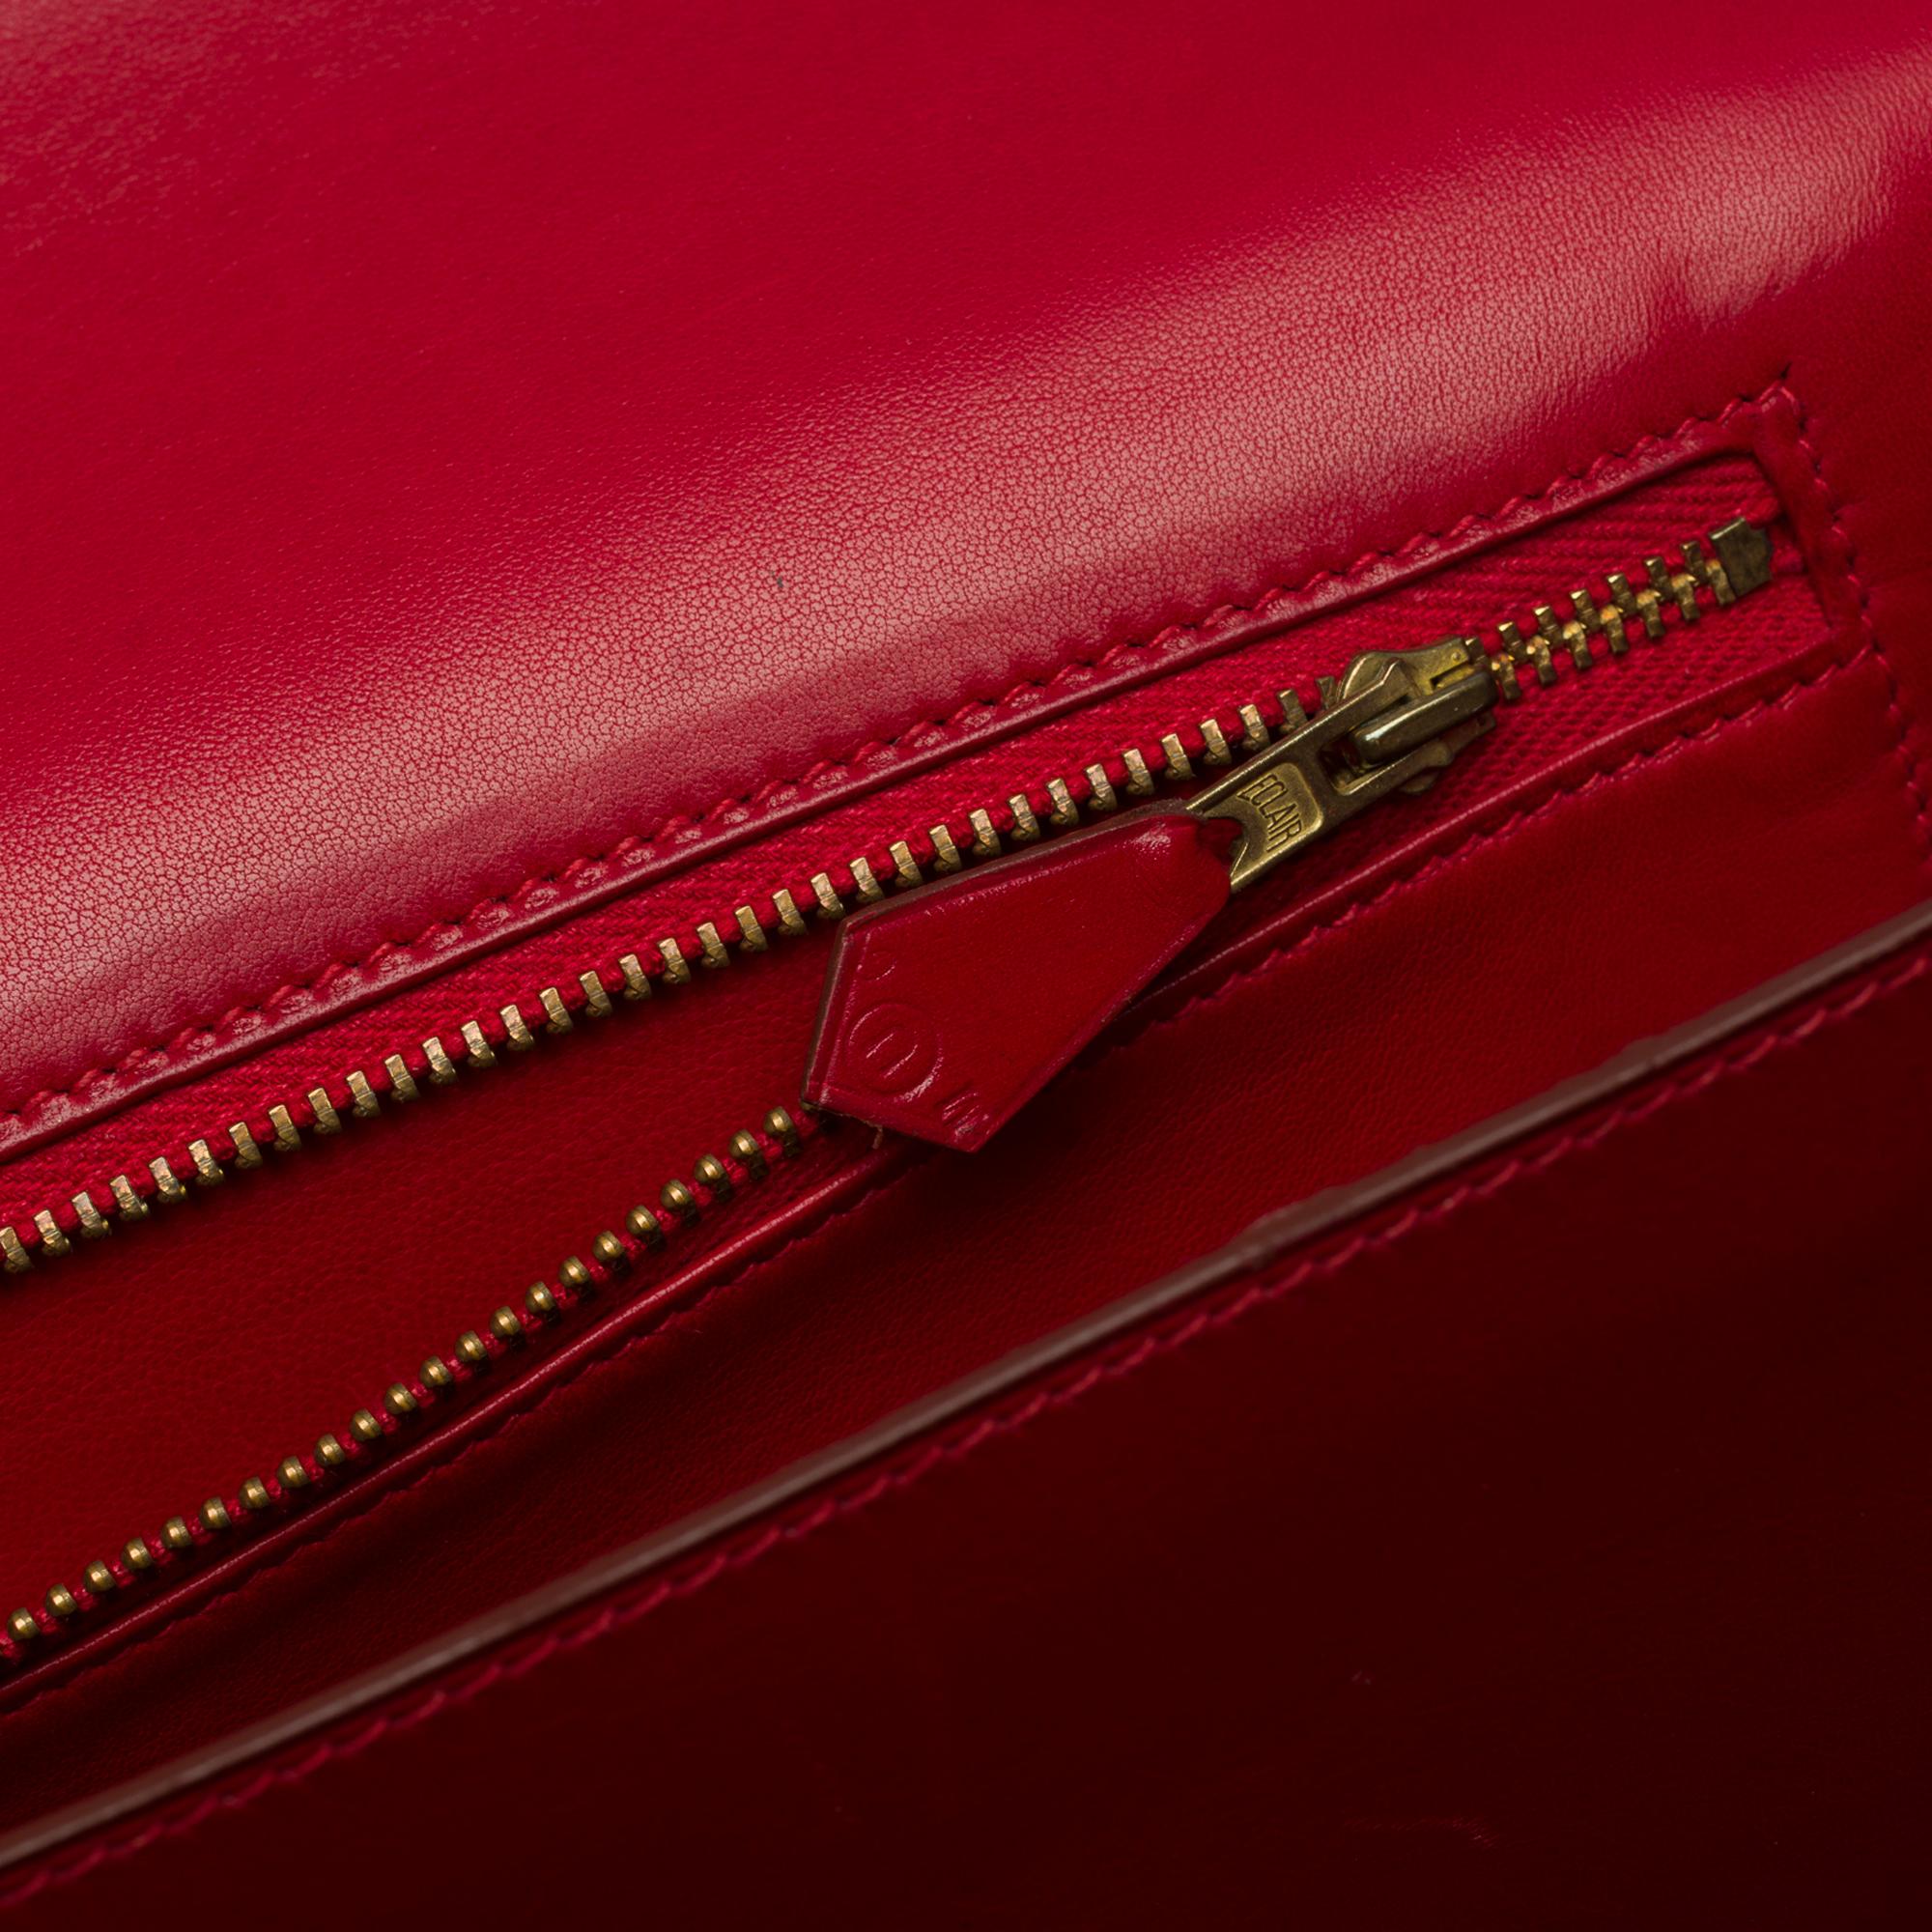 Stunning Hermes Constance 23 shoulder bag in Rouge H boxcalf leather, GHW For Sale 1